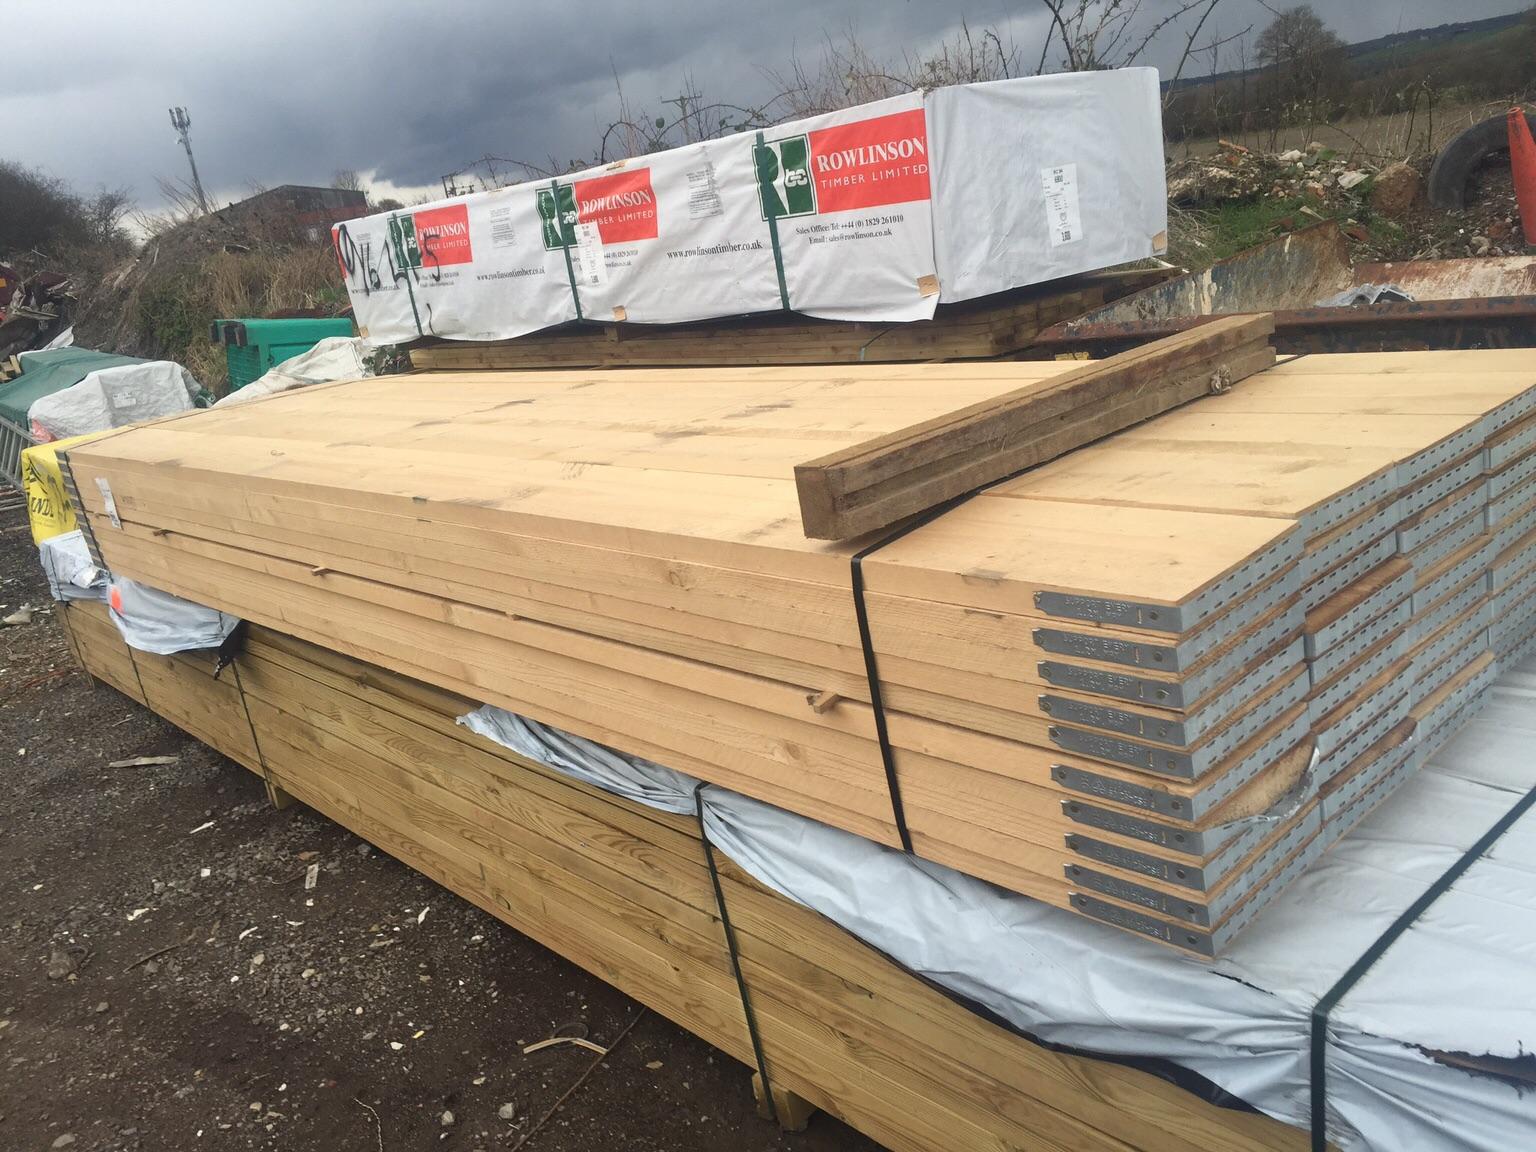 SUSSEX NEW BANDED 13FT SCAFFOLD BOARDS £11 ALL IN 